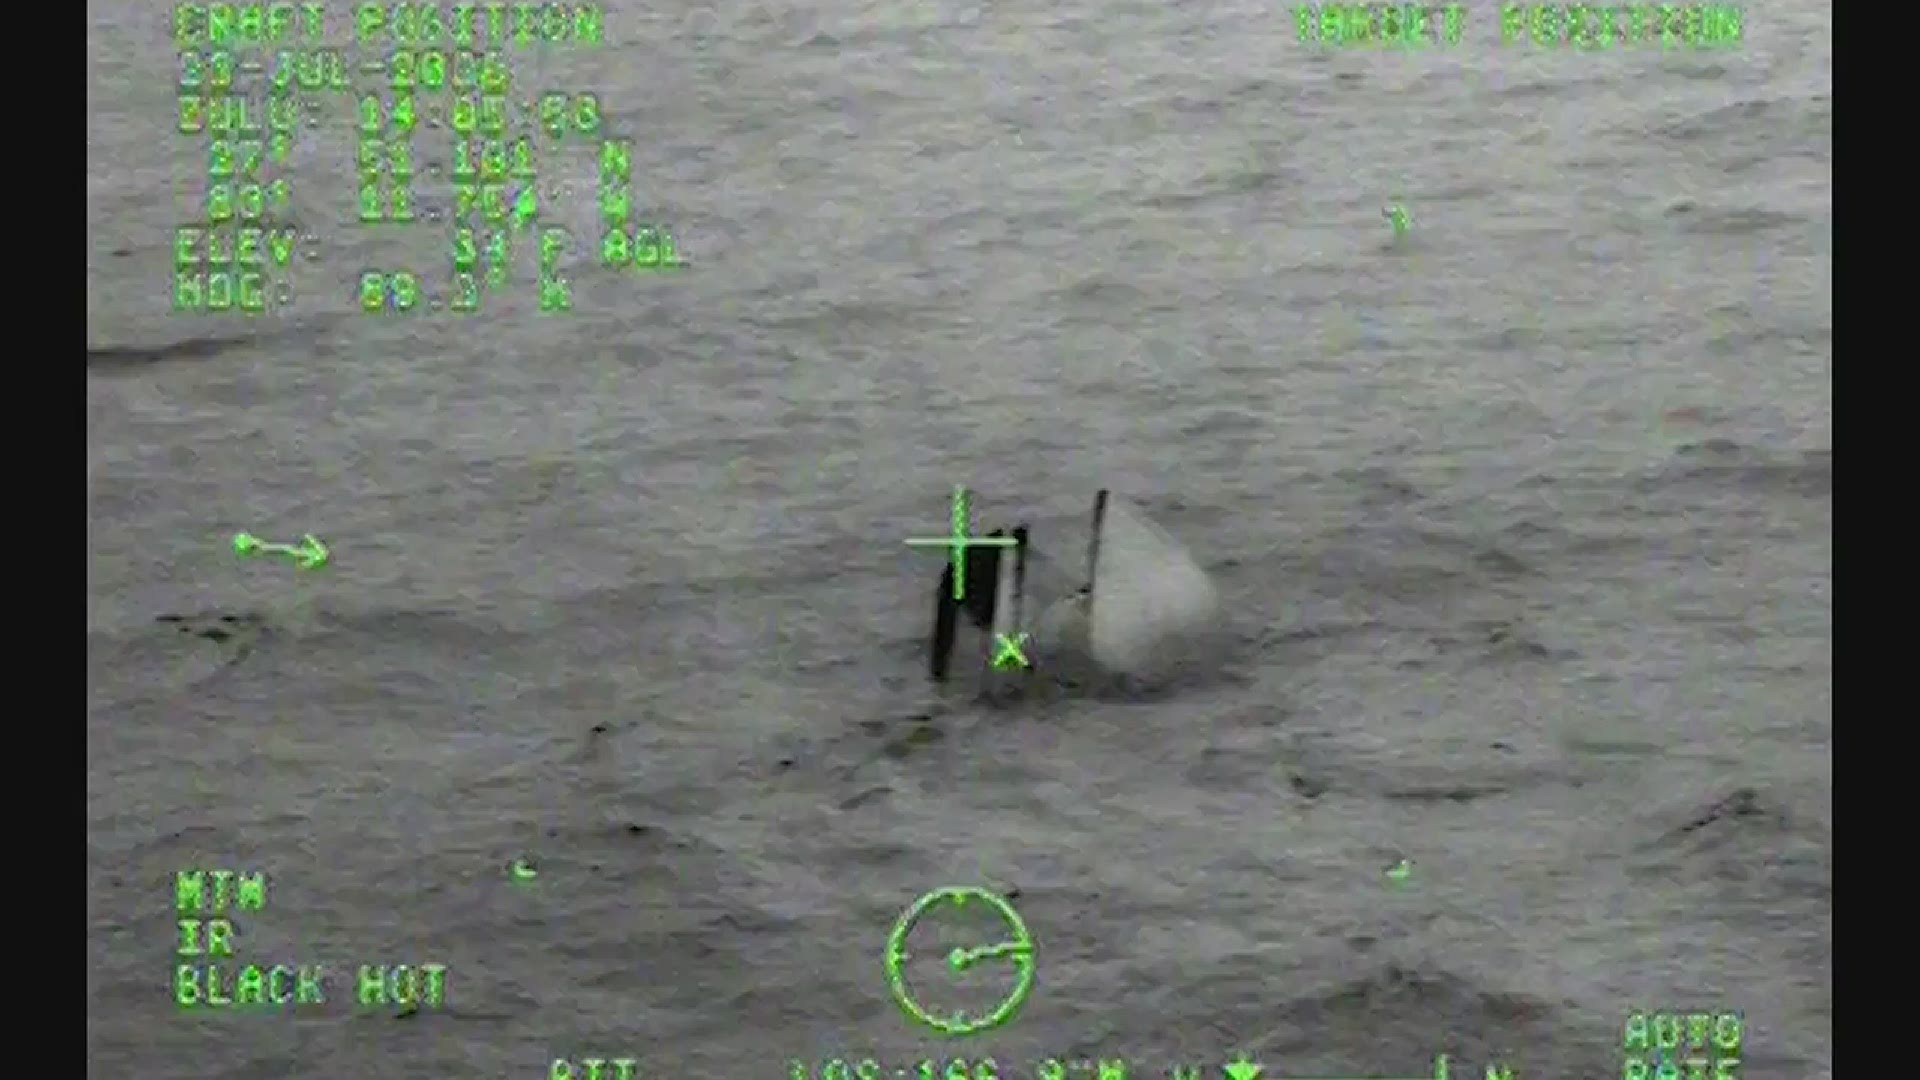 Video shared by the Coast Guards southeastern sector shows the moments a man was rescued from his capsized fishing boat.